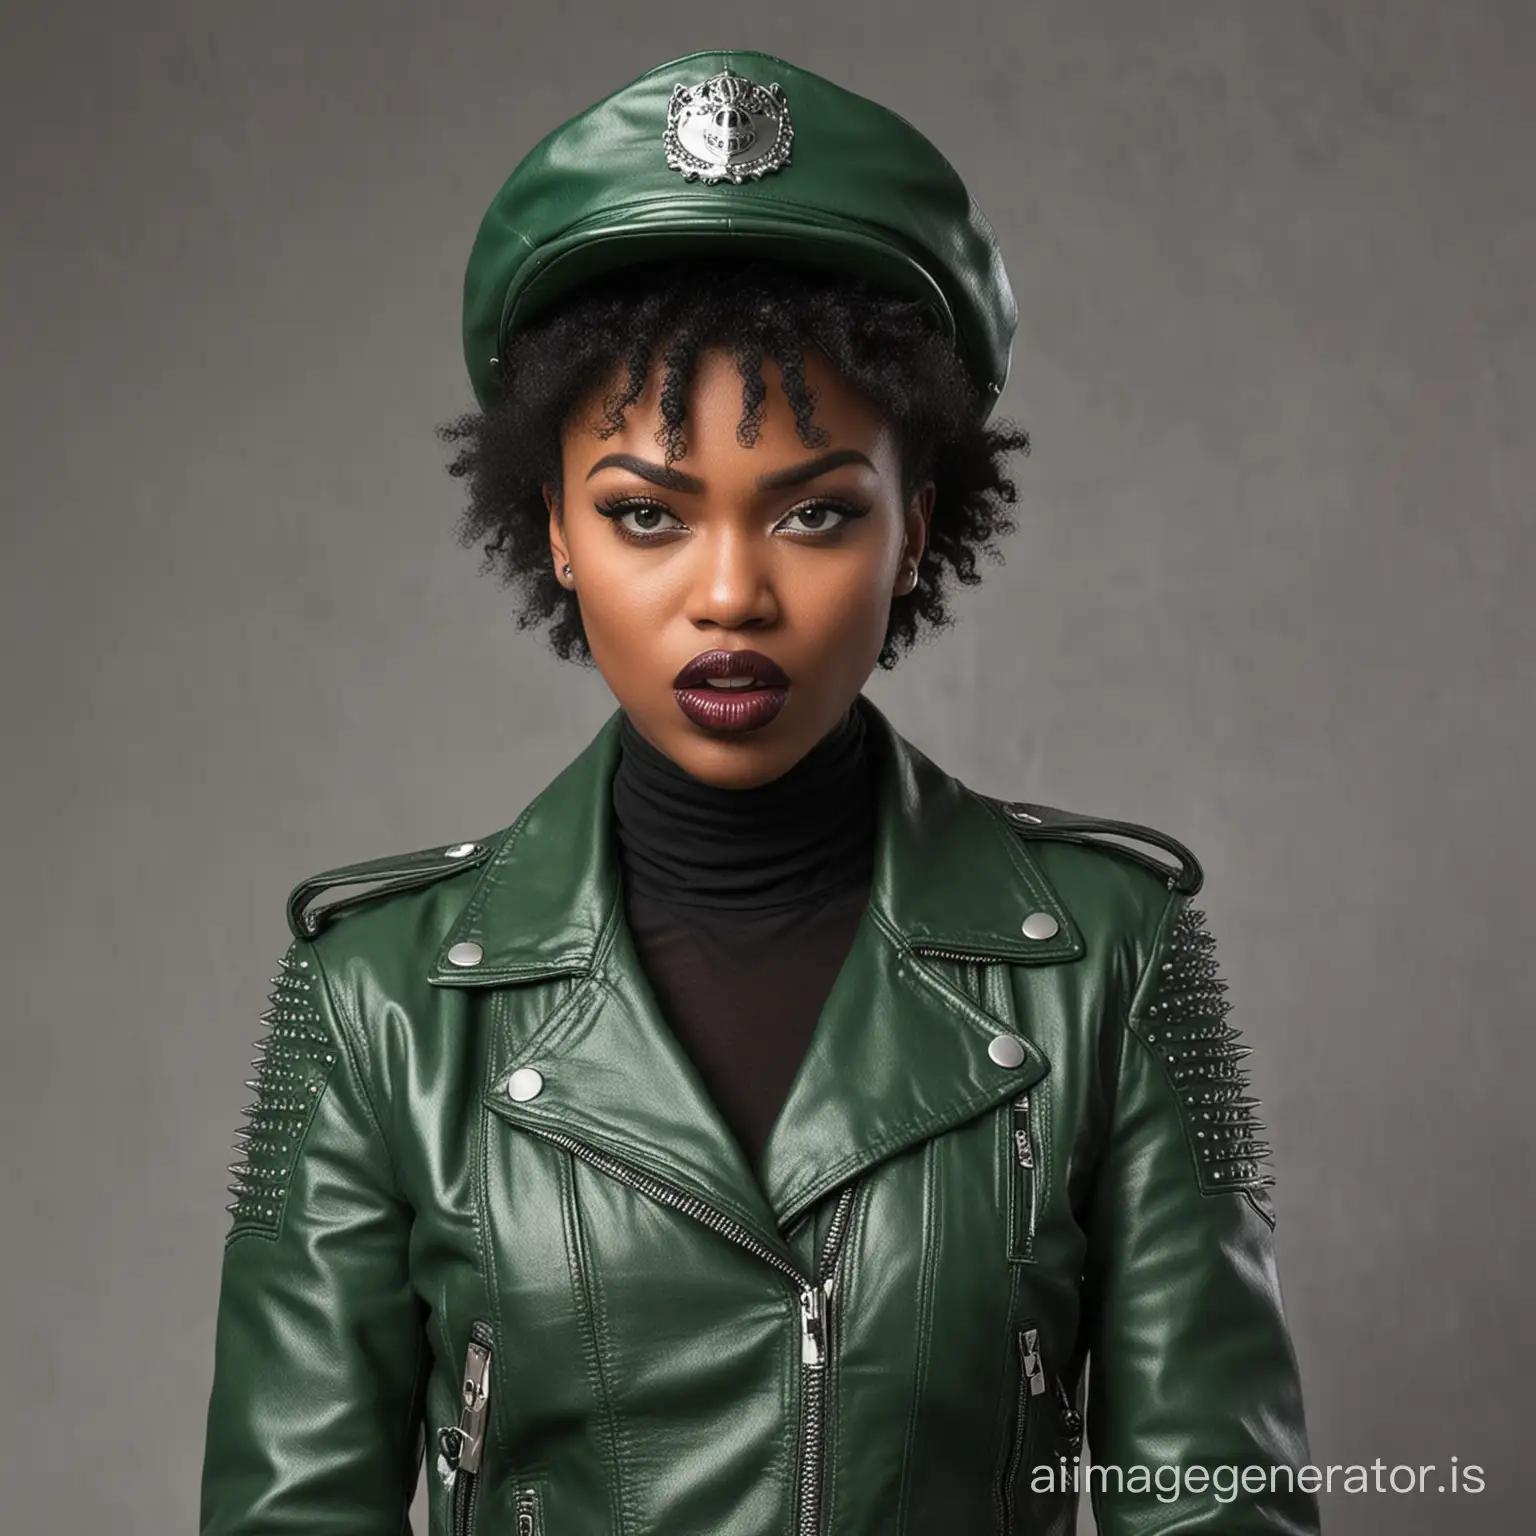 angry punk black woman in green leather gloves, spiked green motorcycle jacket. and green lipstick, leather masters cap